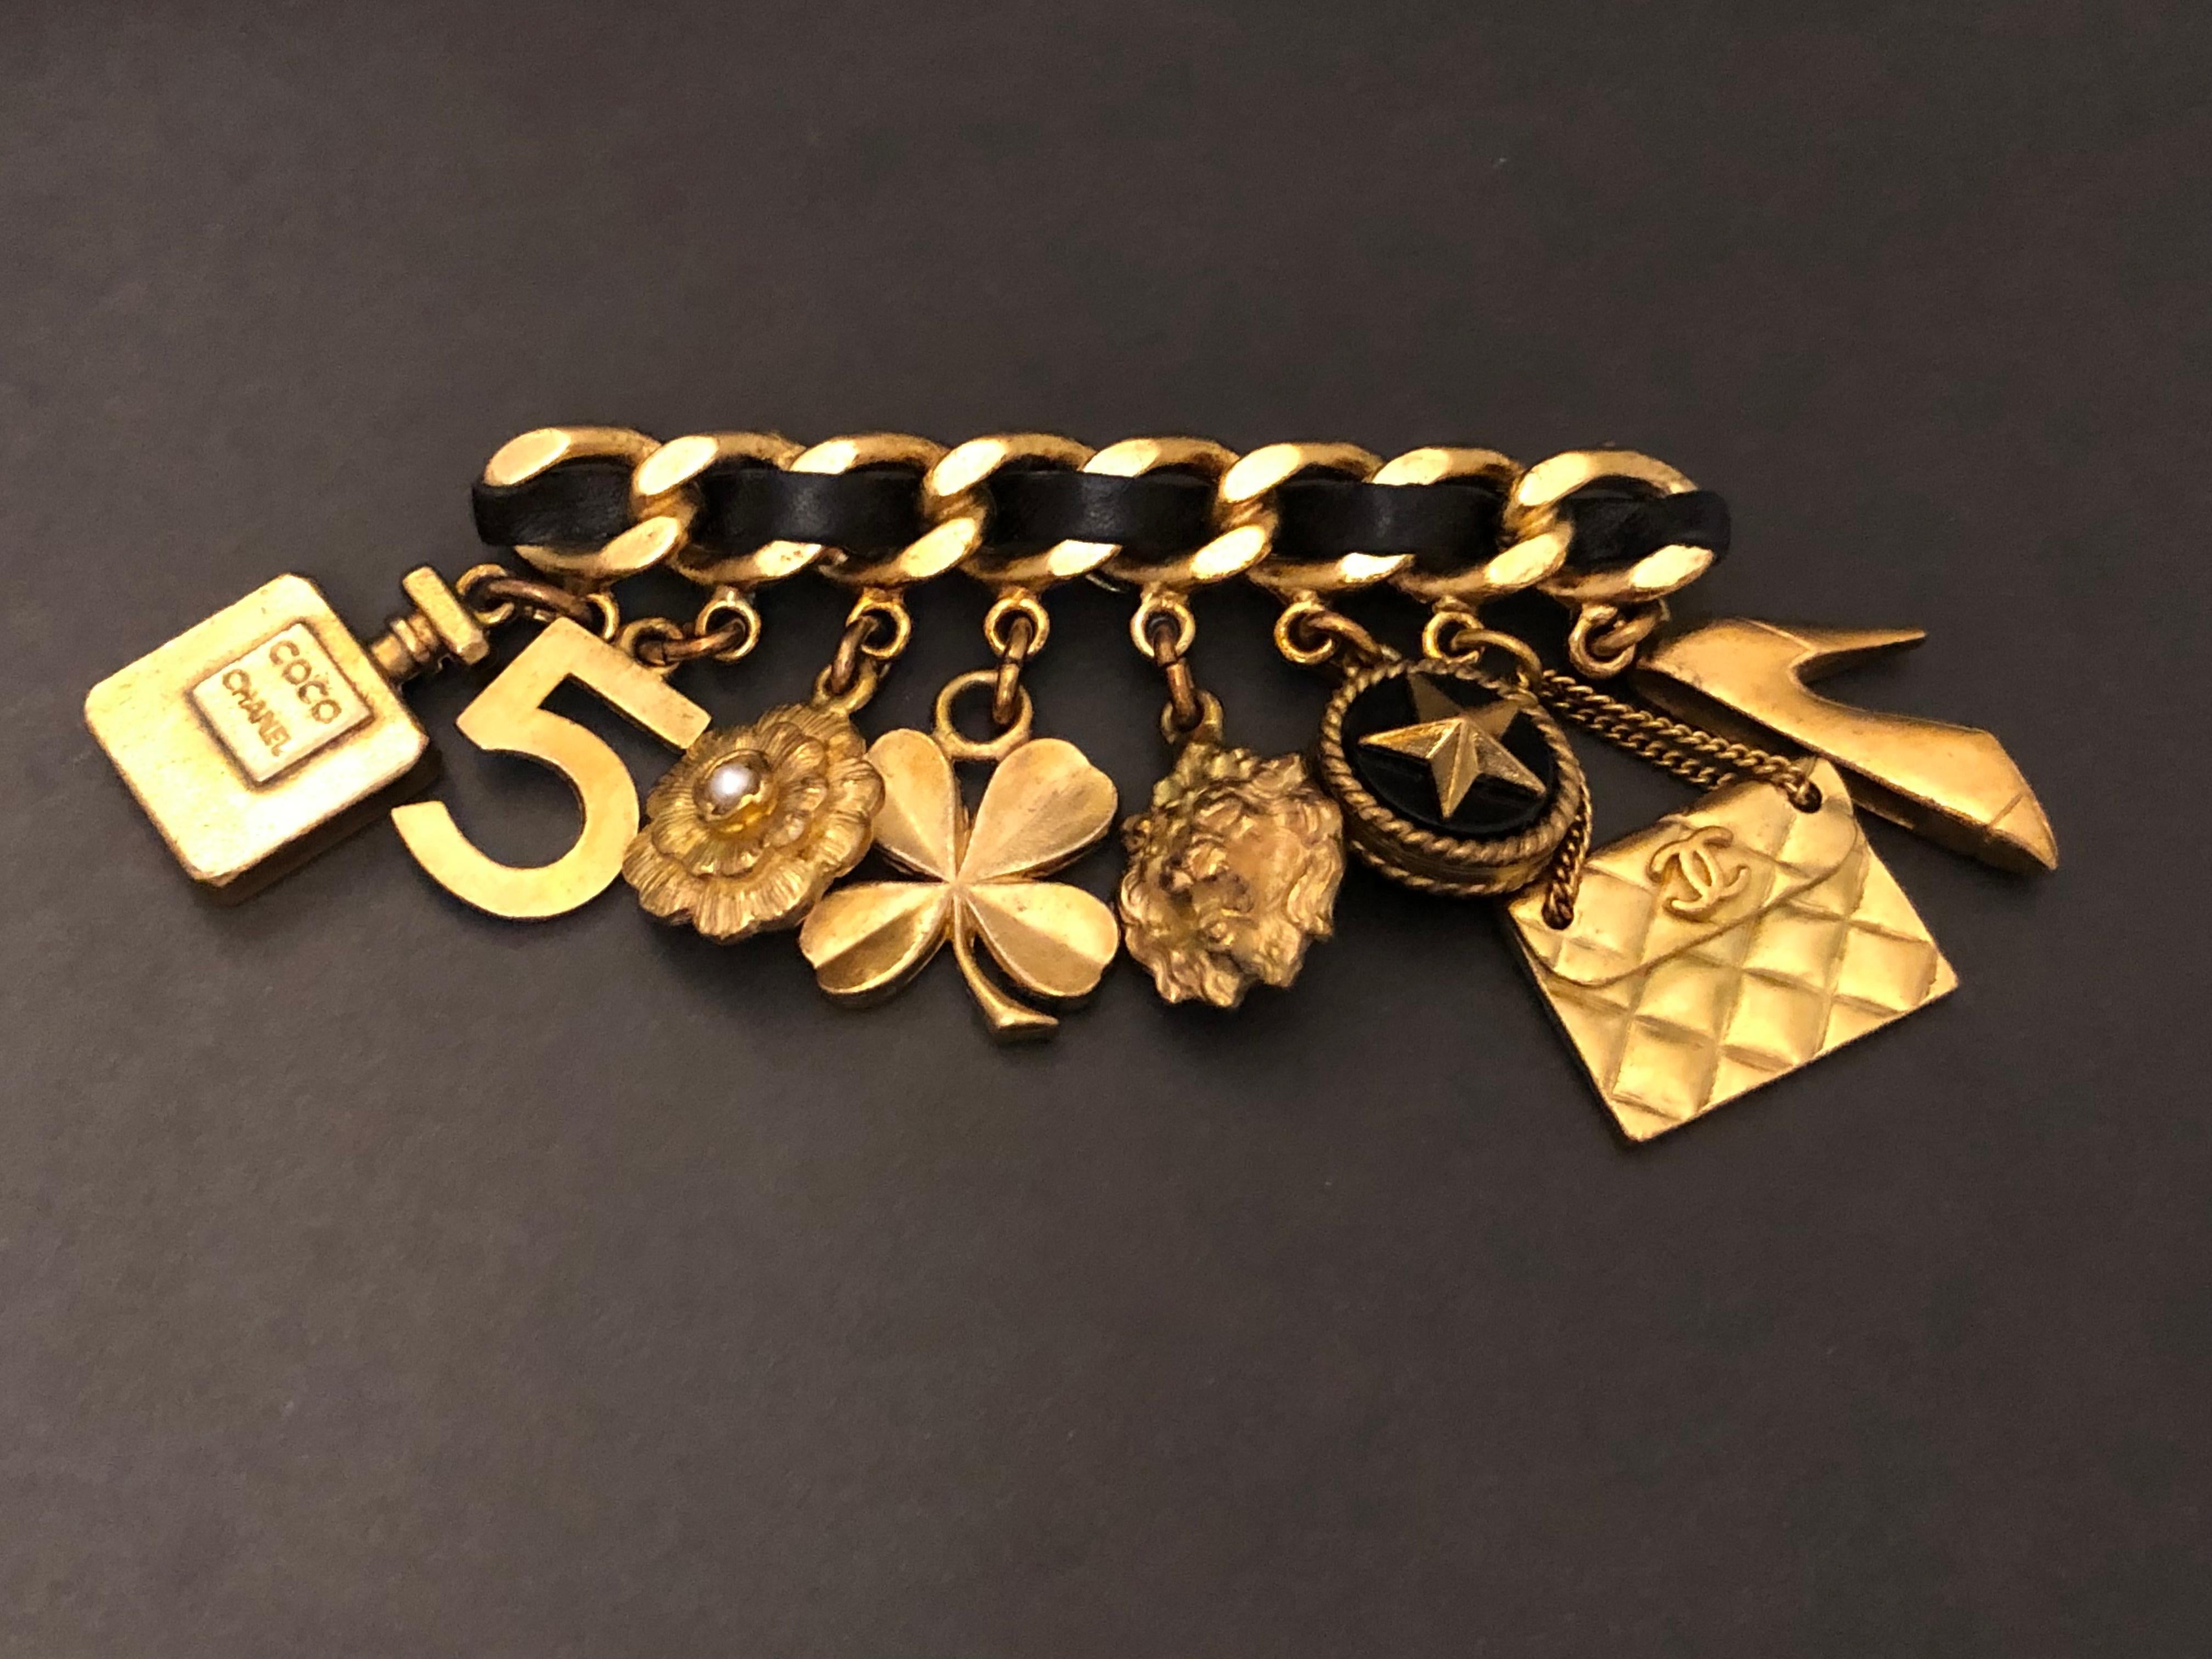 1994 Vintage Chanel gold toned chain brooch featuring eight iconic motifs including clover, camellia, lion, No.5, perfume bottle etc interlaced with black leather.  Stamped 94A made in France. Measures approximately 8.2 x 5.1 cm. Comes with box.